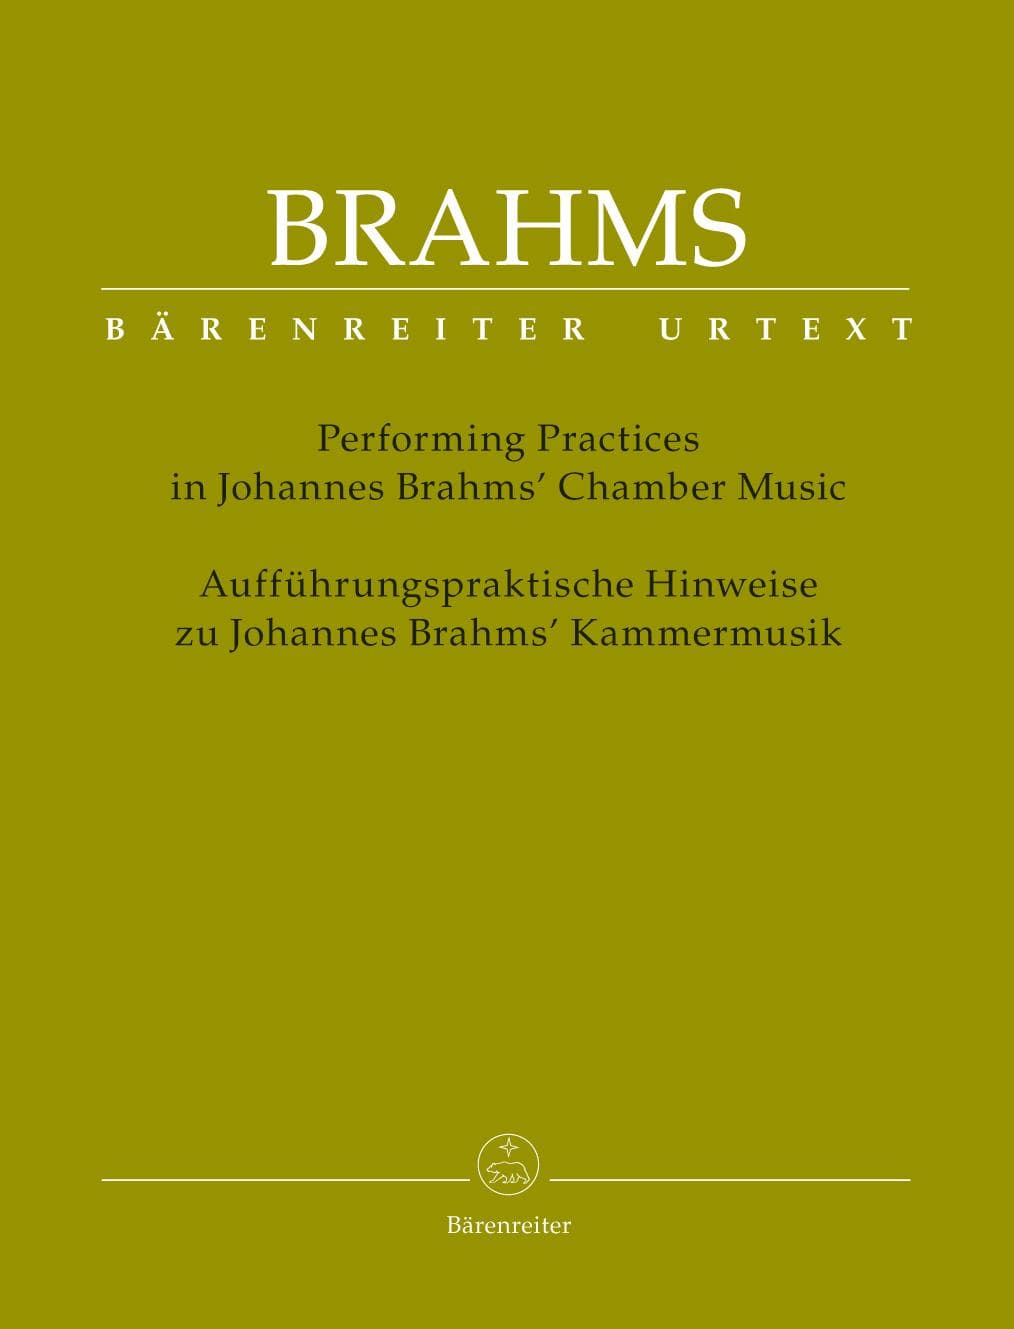 Performing Practices in Johannes Brahms' Chamber Music by Clive Brown, Neal Peres Da Costa, and Kate Bennett Wadsworth